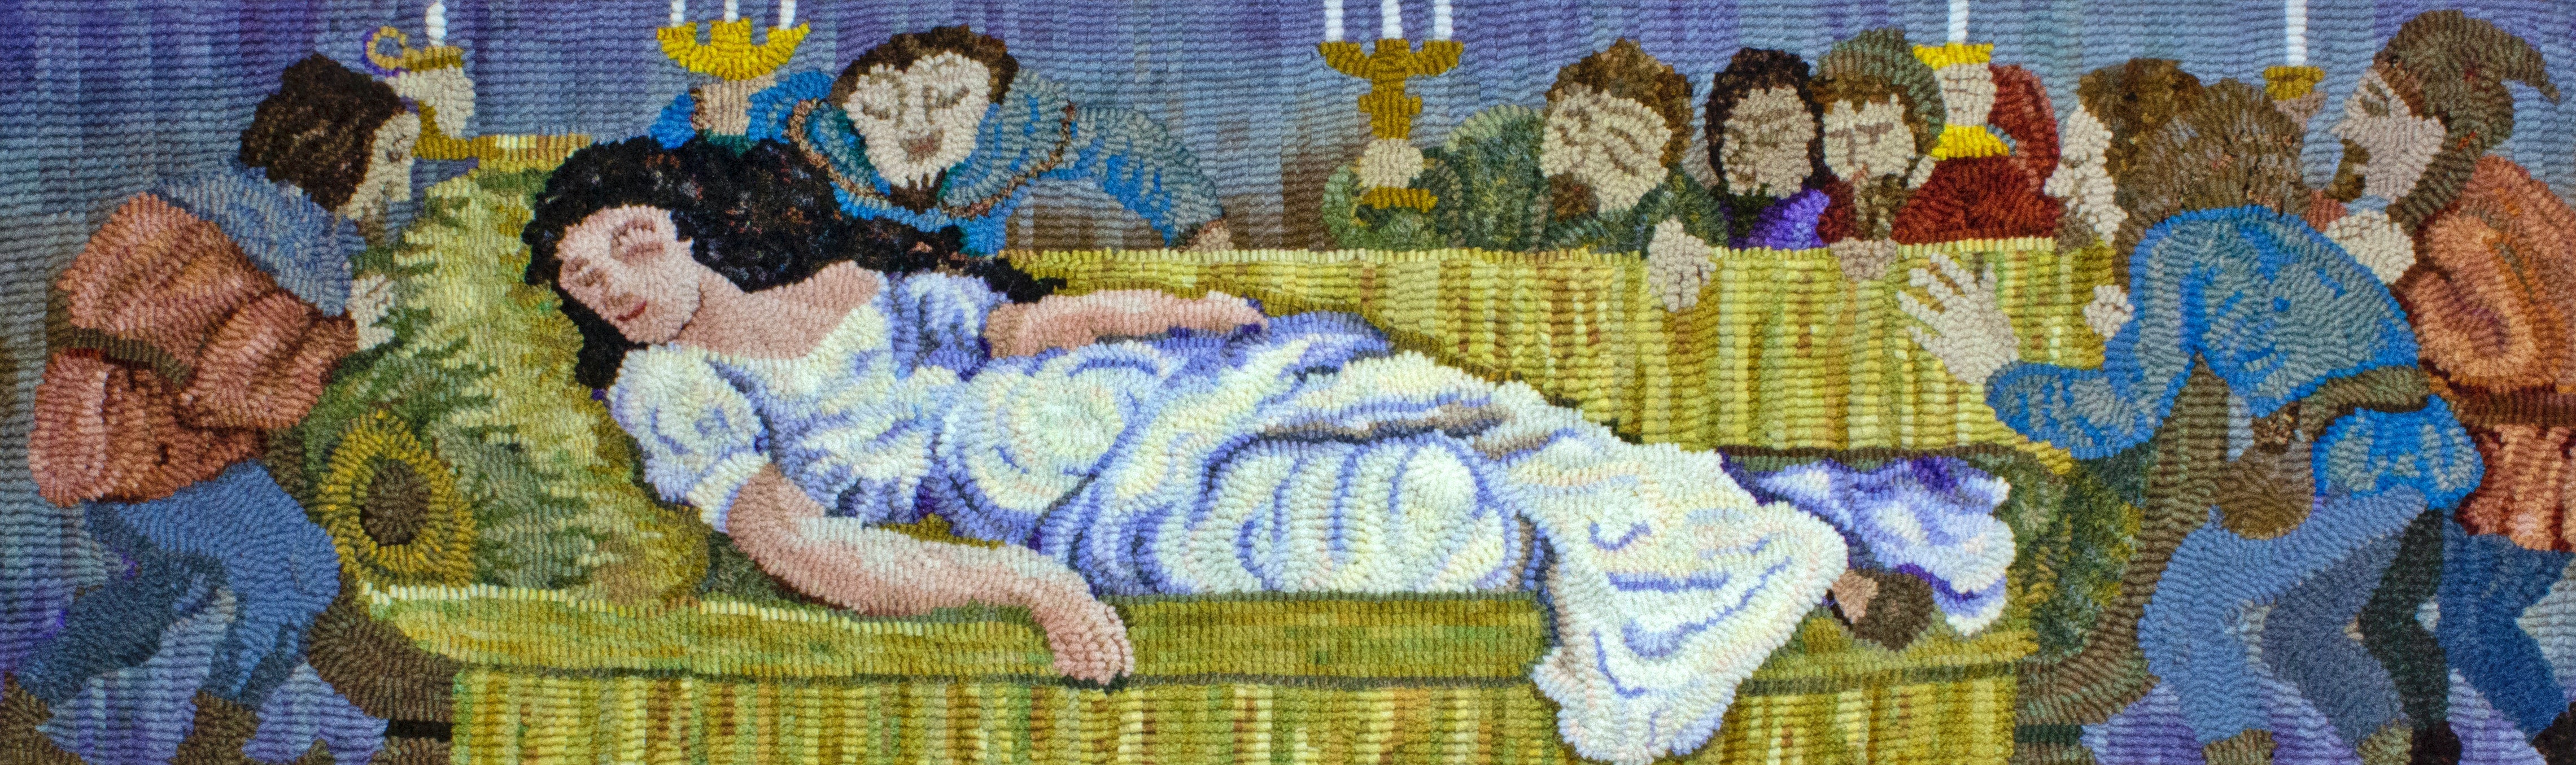 The Golden Age of Fairy Tales - Rug Hooking Patterns by Honey Bee